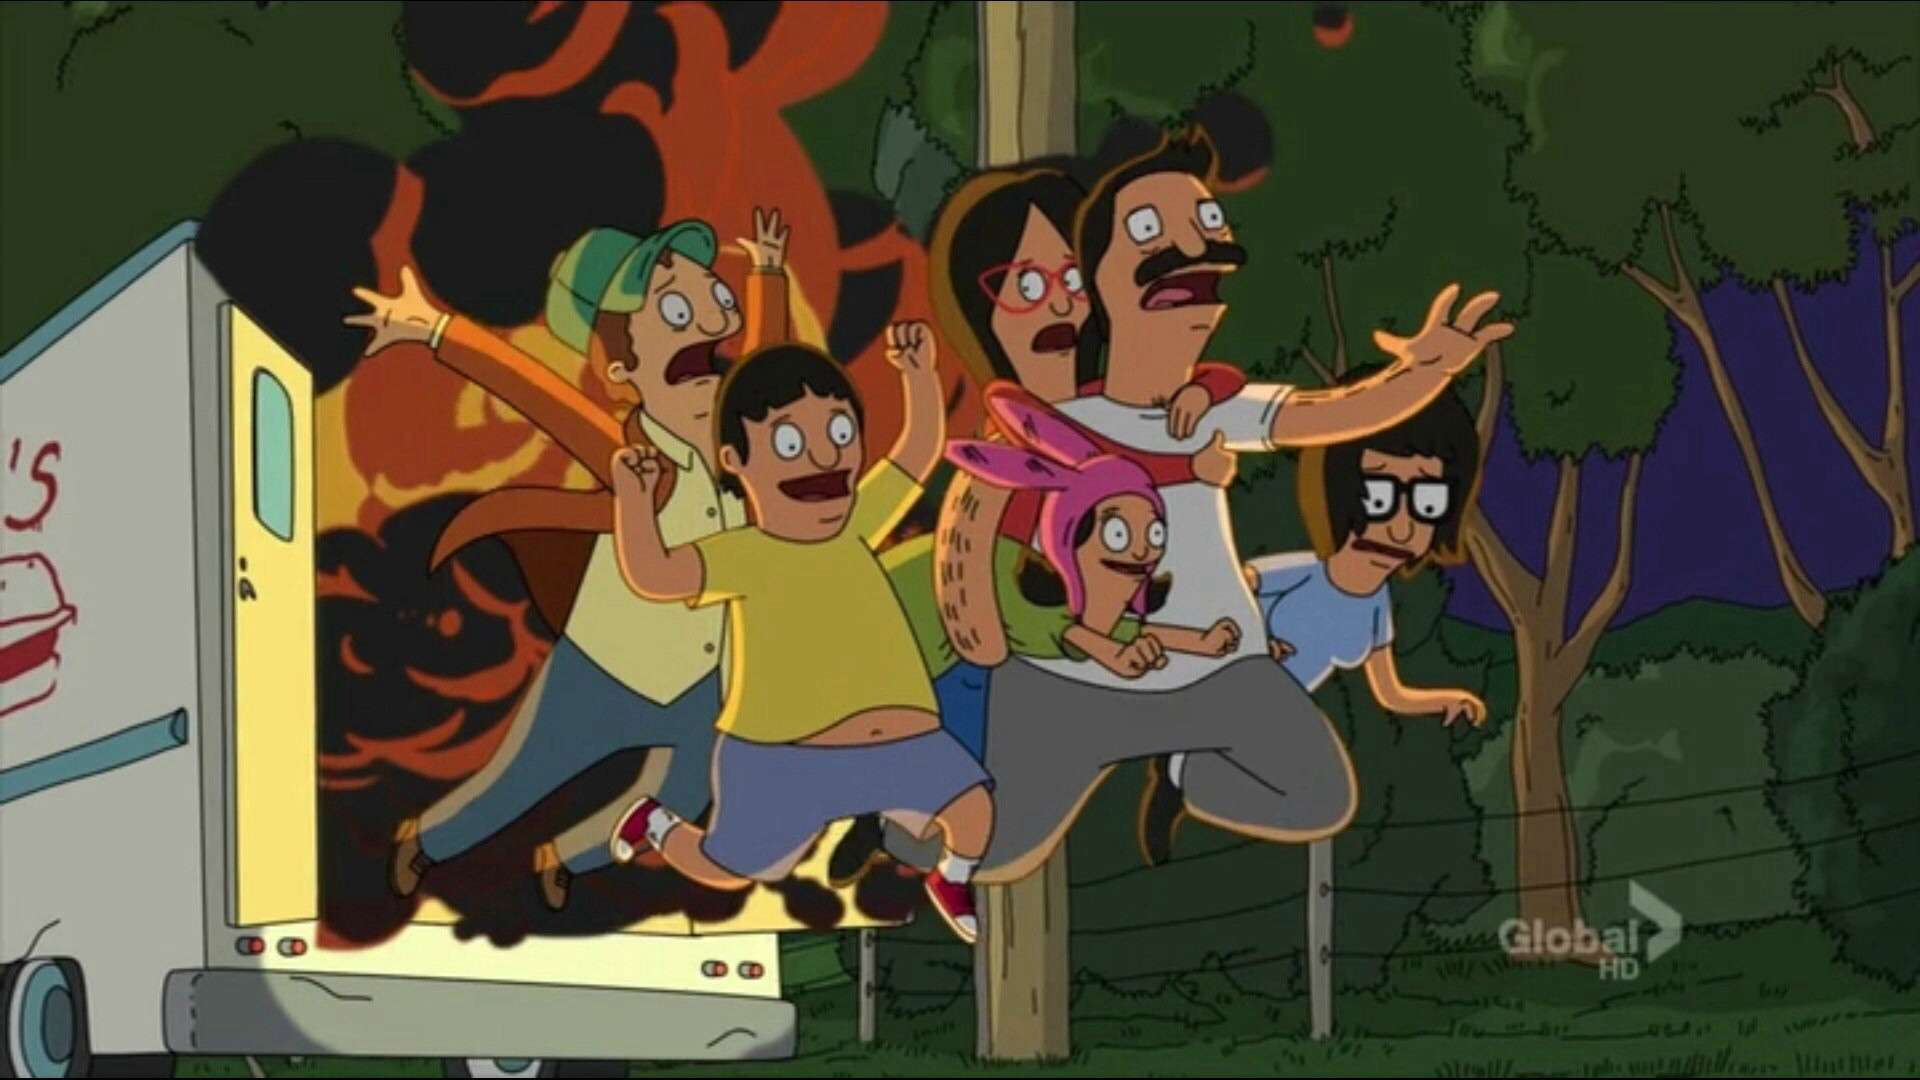 "Bob's Burgers Food Truck meets an untimely & fiery end.